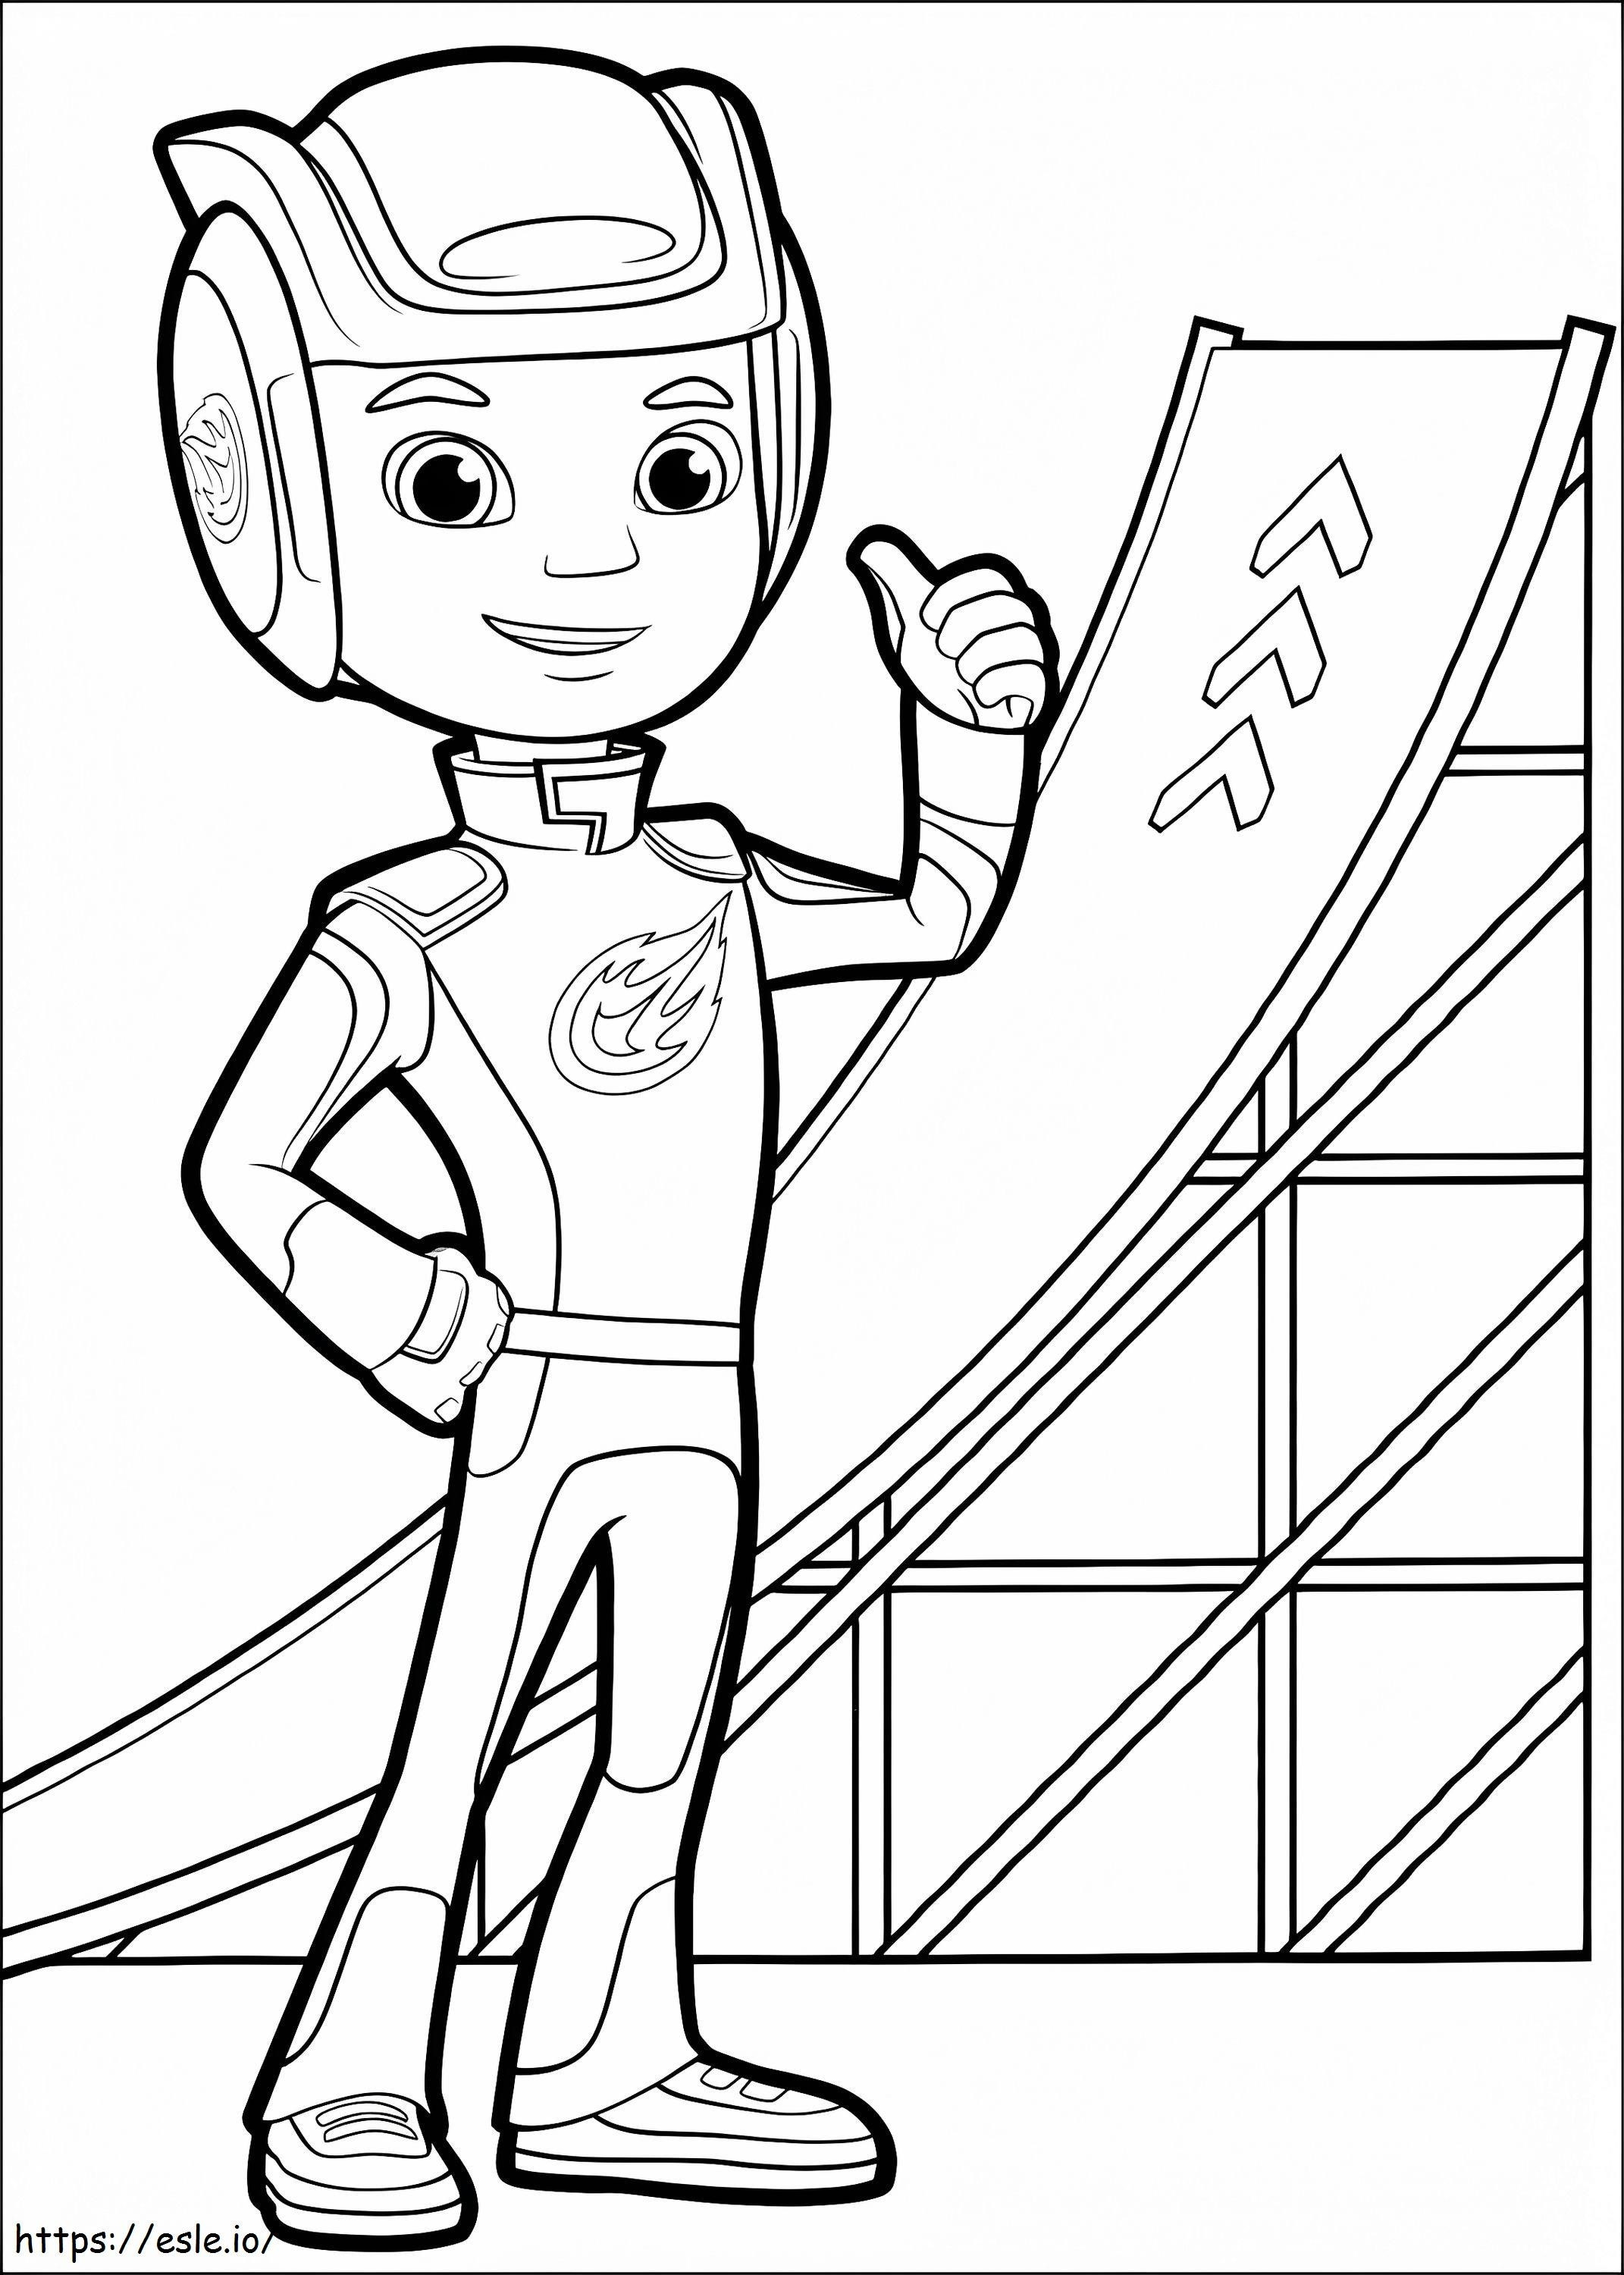 1533950225 And Smiling A4 coloring page